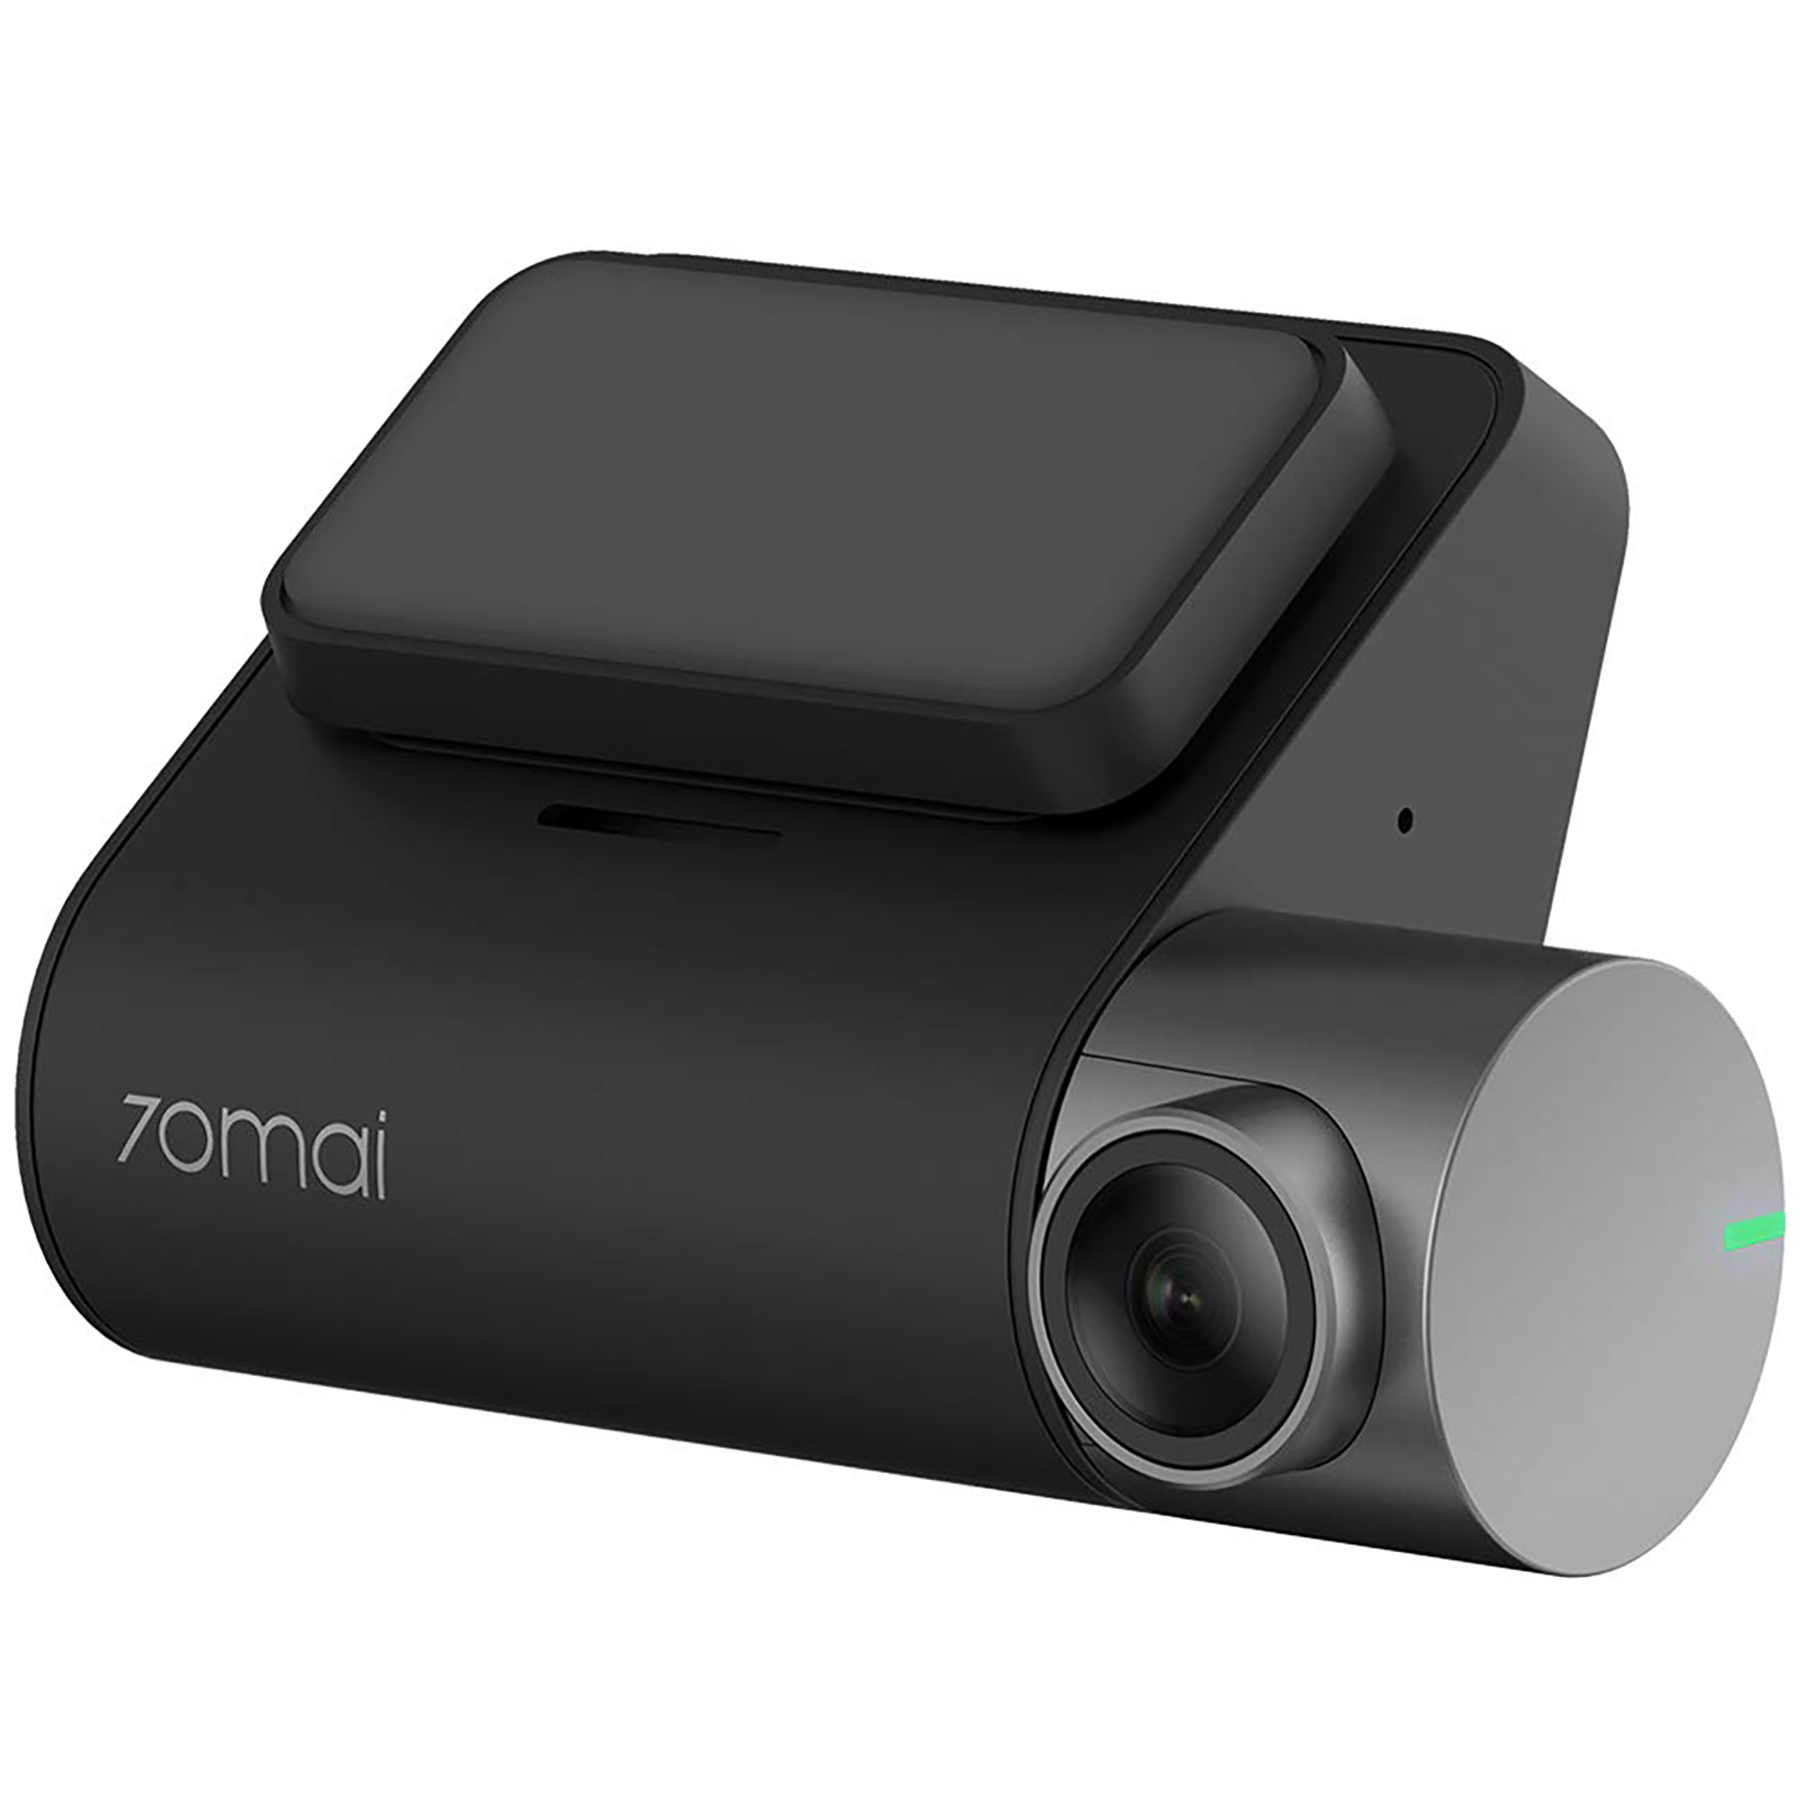 Set it and forget it: The 70mai Dash Cam Pro is always watching the road  ahead